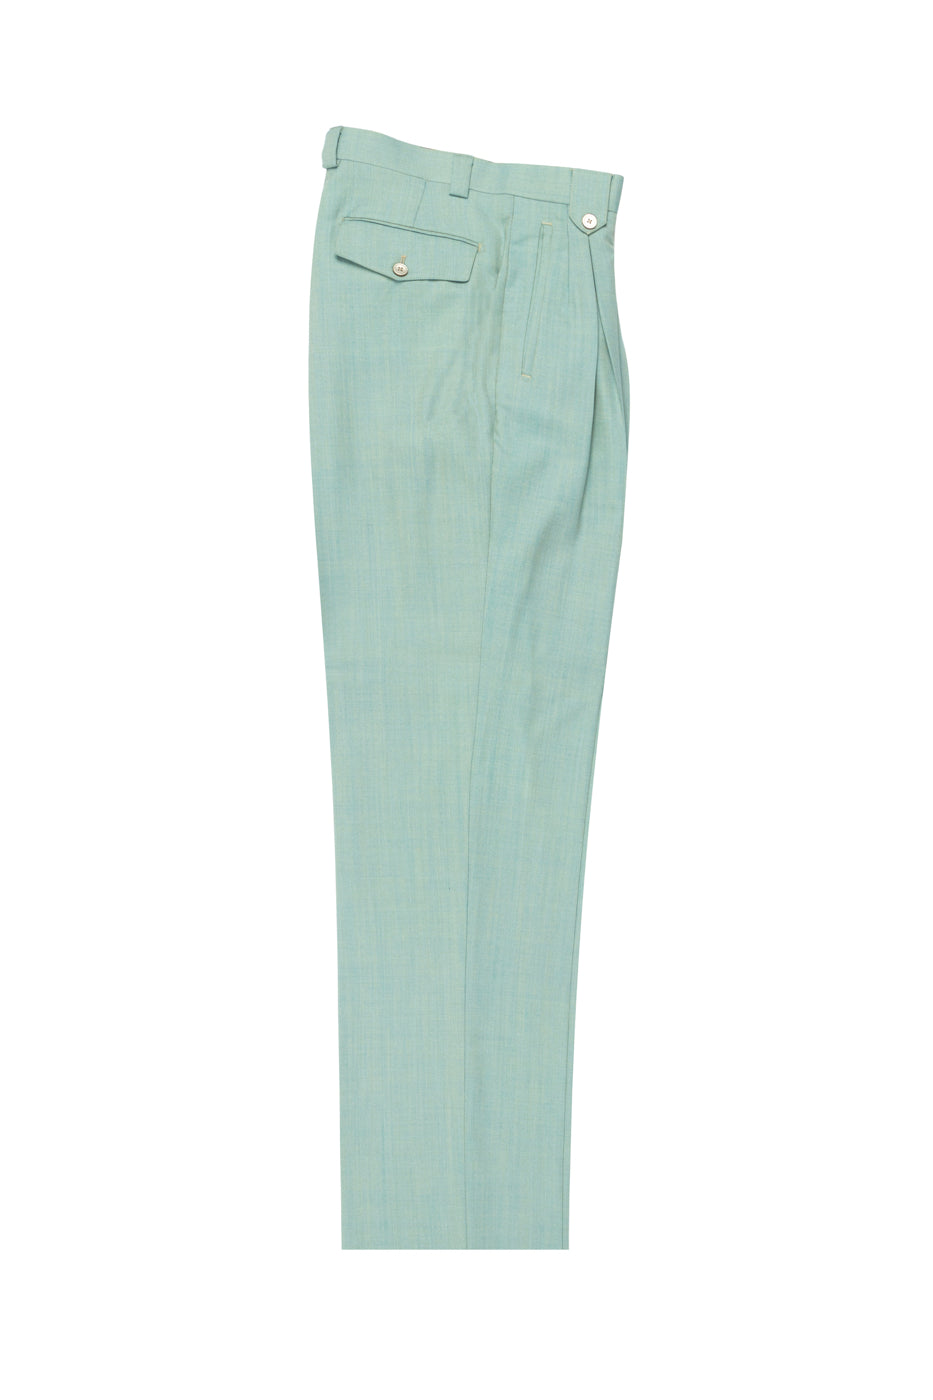 Mint Green, Wide Leg Wool Dress Pant 2586/2576 by Tiglio Luxe RS13005/